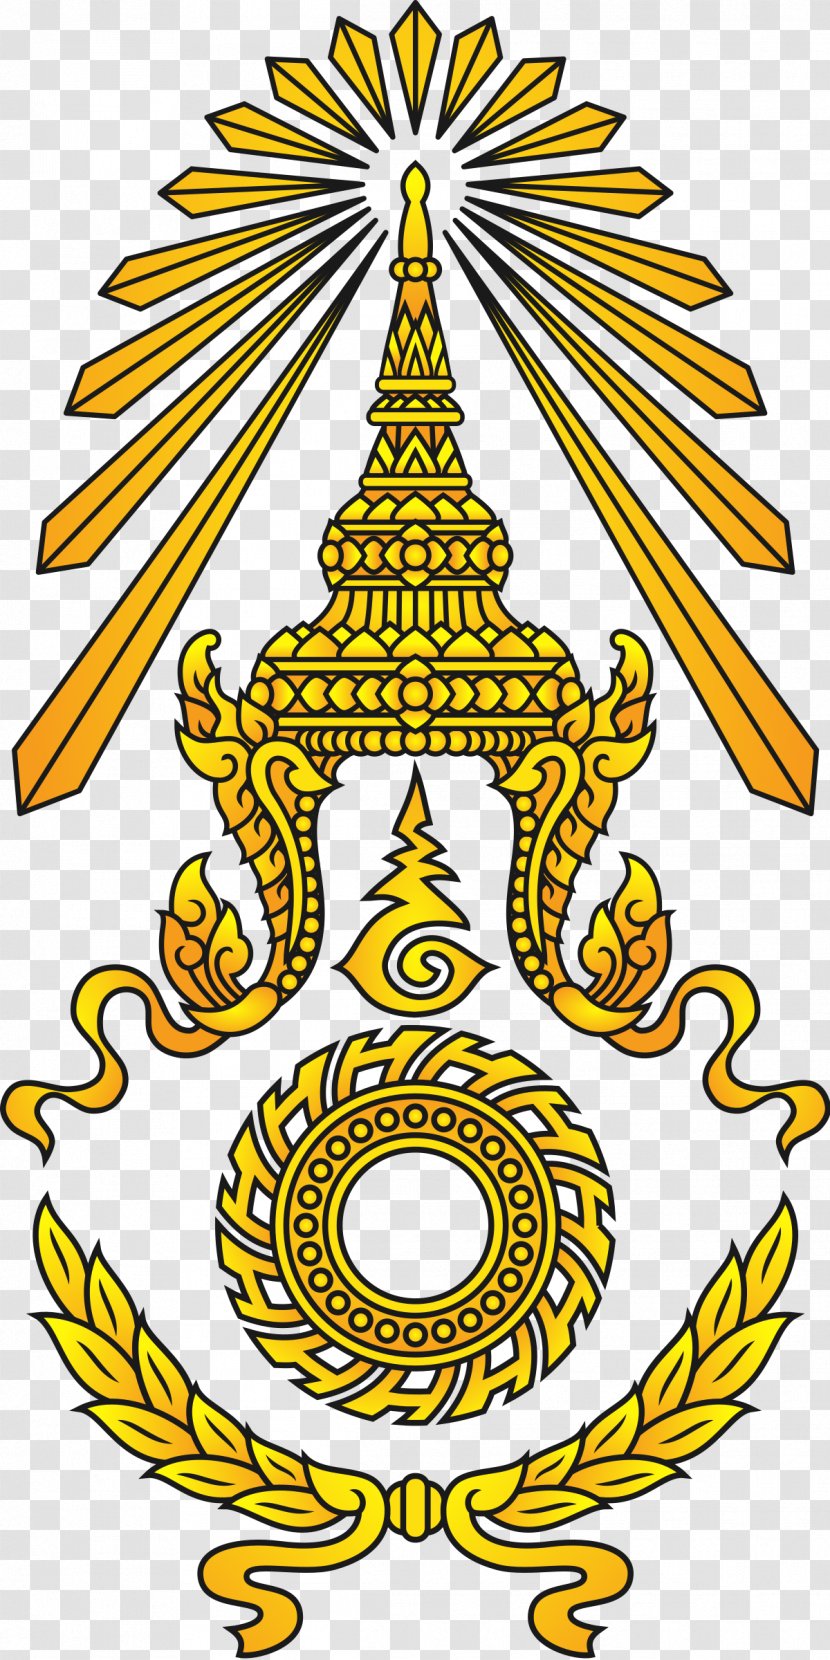 Royal Thai Army Thailand Armed Forces Navy Air Force - Tree Transparent PNG